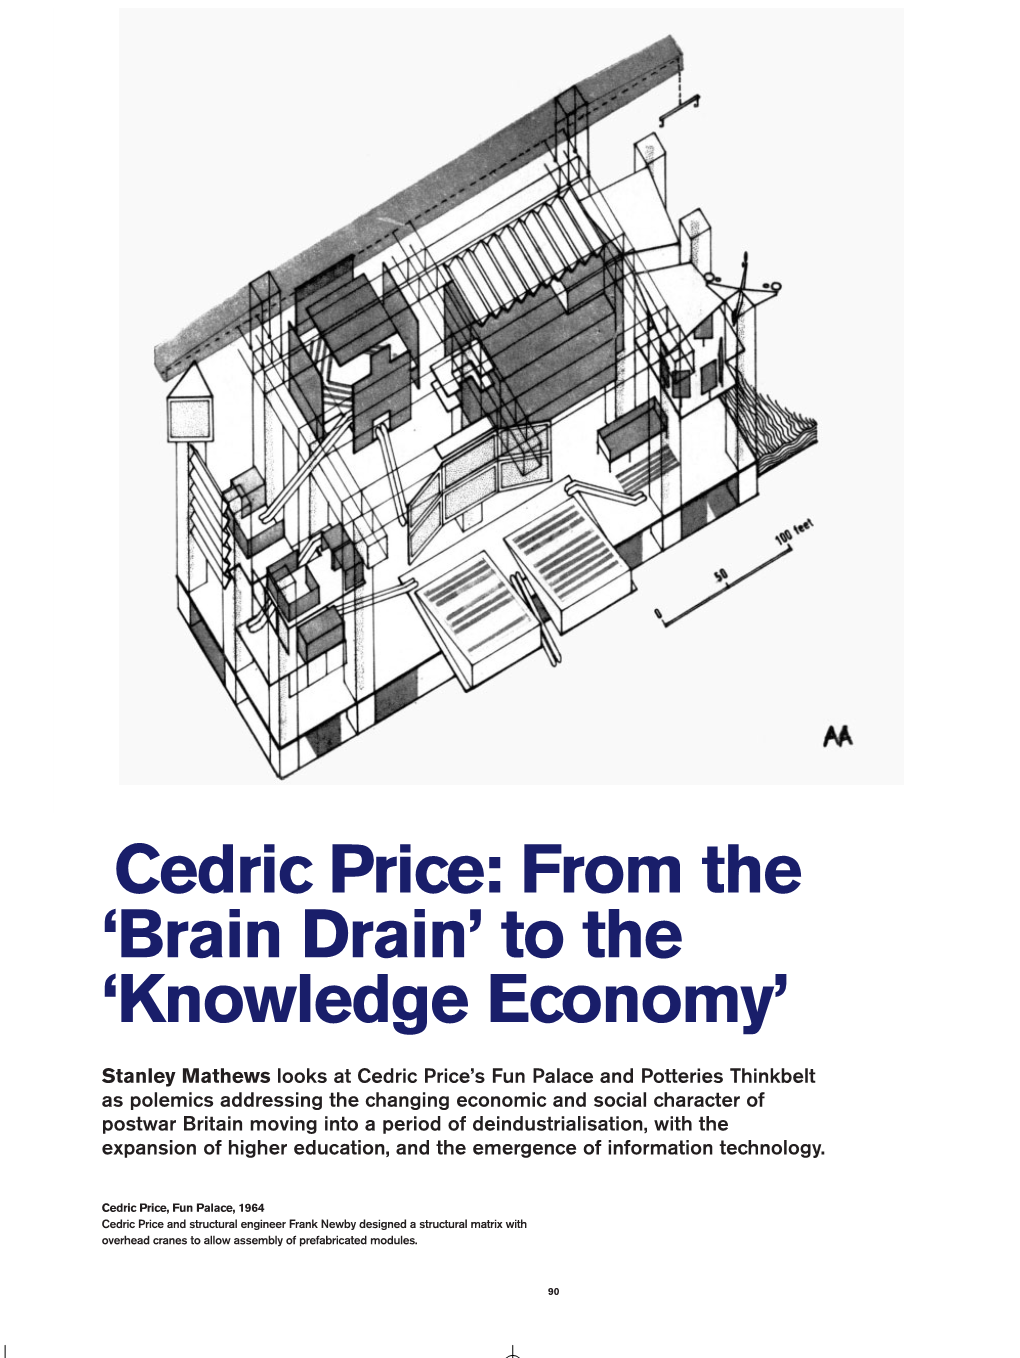 Cedric Price: from the ‘Brain Drain’ to the ‘Knowledge Economy’